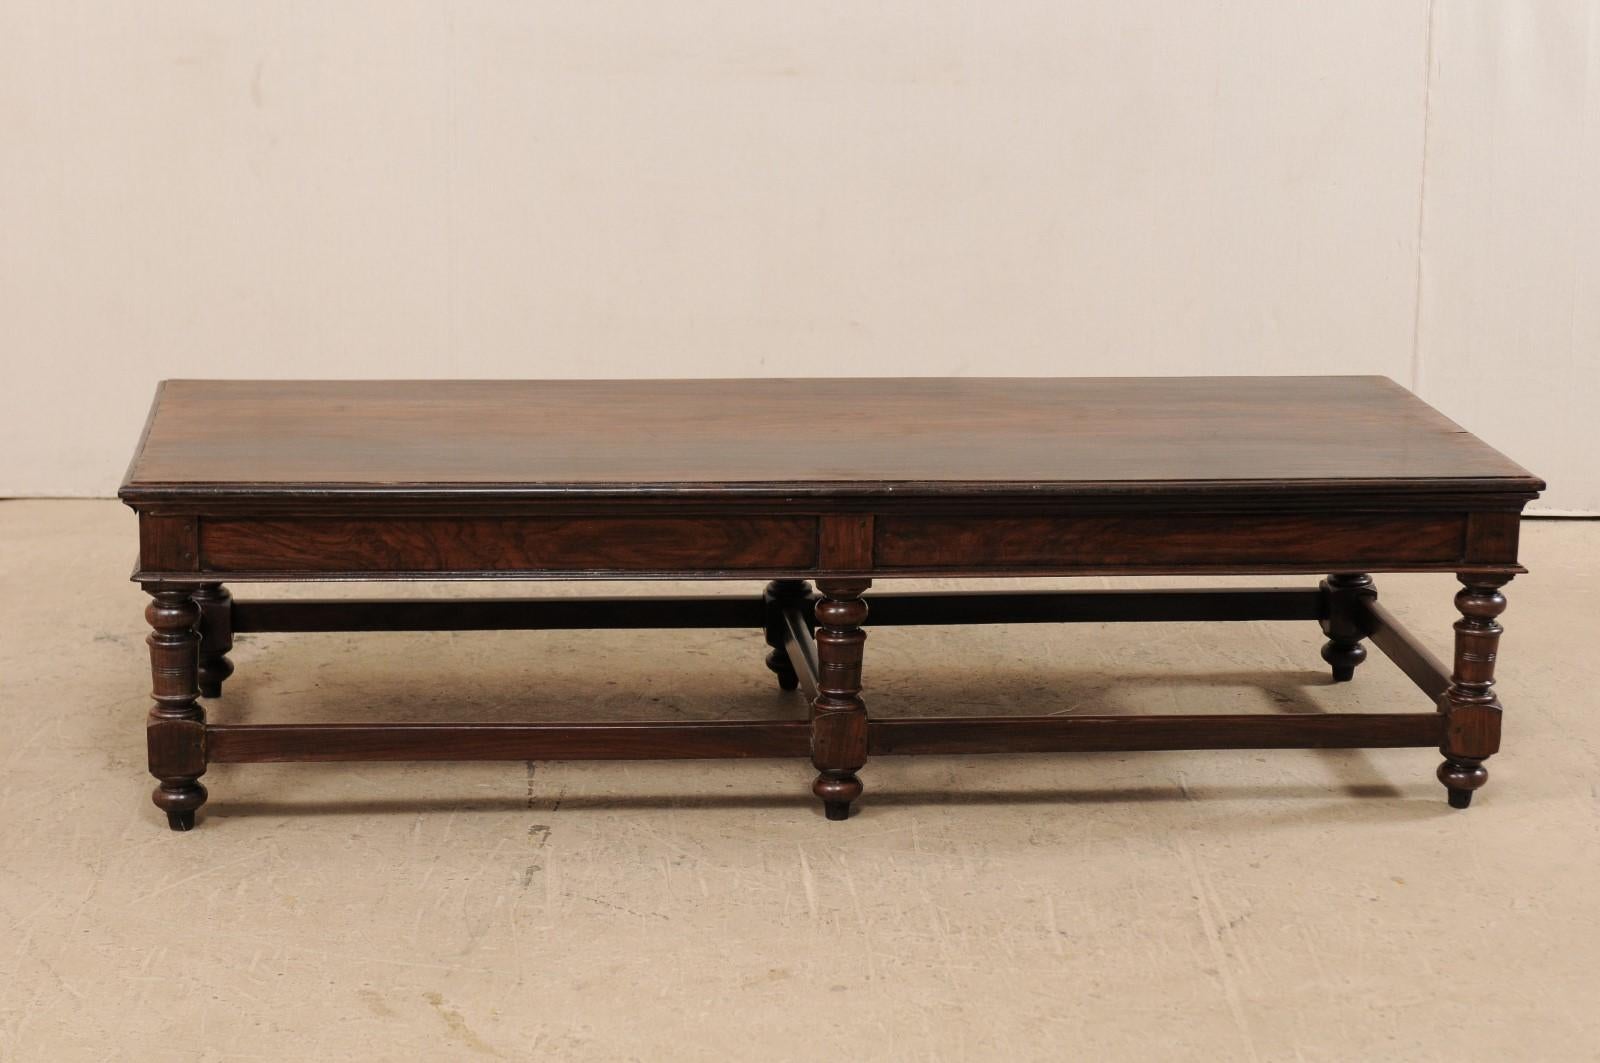 20th Century A Beautiful Pair of 6 Ft. Rosewood Coffee Tables (or Benches) from Kerala, India